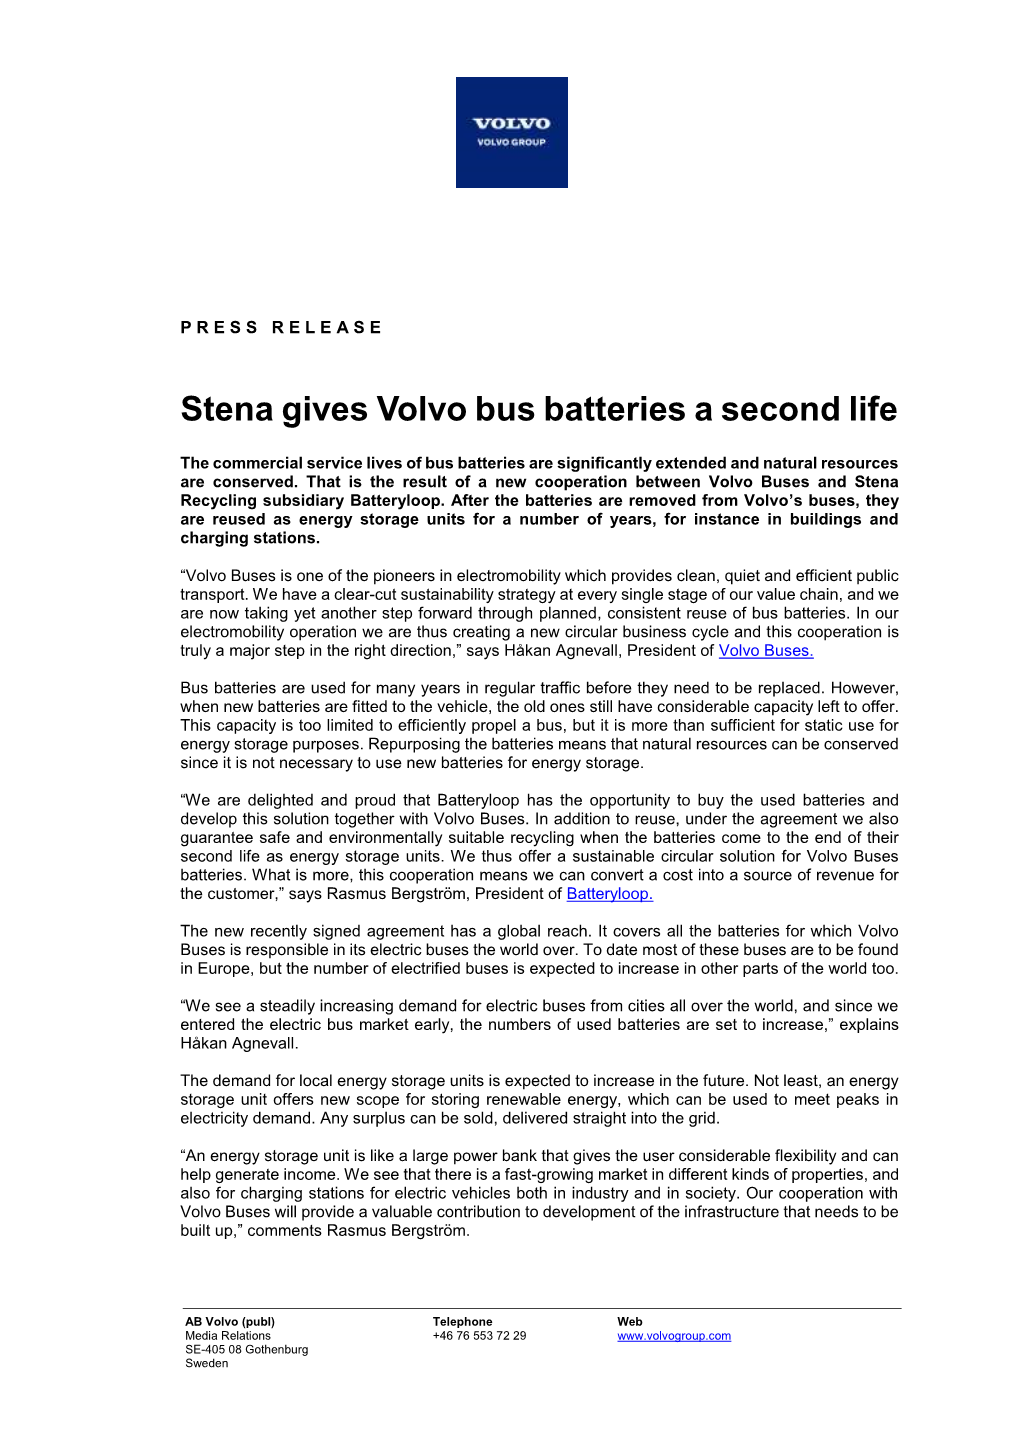 Stena Gives Volvo Bus Batteries a Second Life